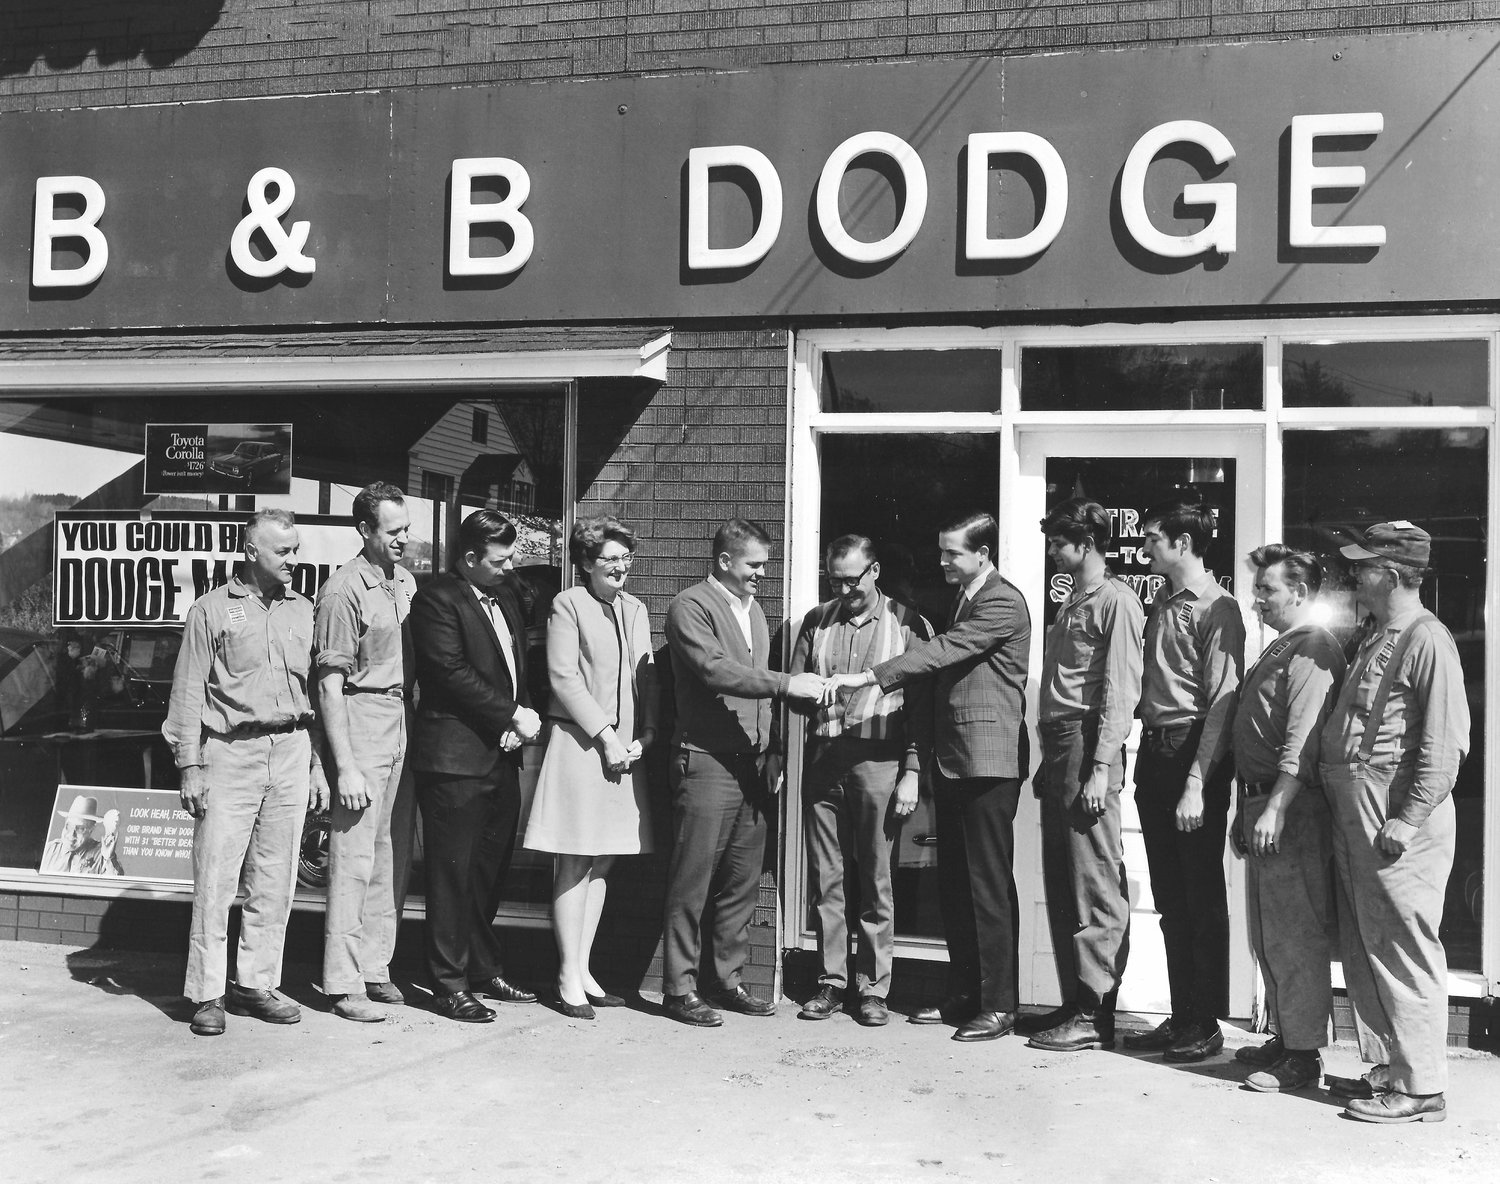 On April 26, 1970, surrounded by their employees, three brothers from Honesdale opened B&;B Dodge. Pictured are Wes Weber, left, Bill Tennant, Gary Peck, Agnes Weidner, Bob..Carmody, Bob McKinnell, John Carmody, Dennis Jennings, Steve Carmody, Art Meyer and Charlie Schaff.